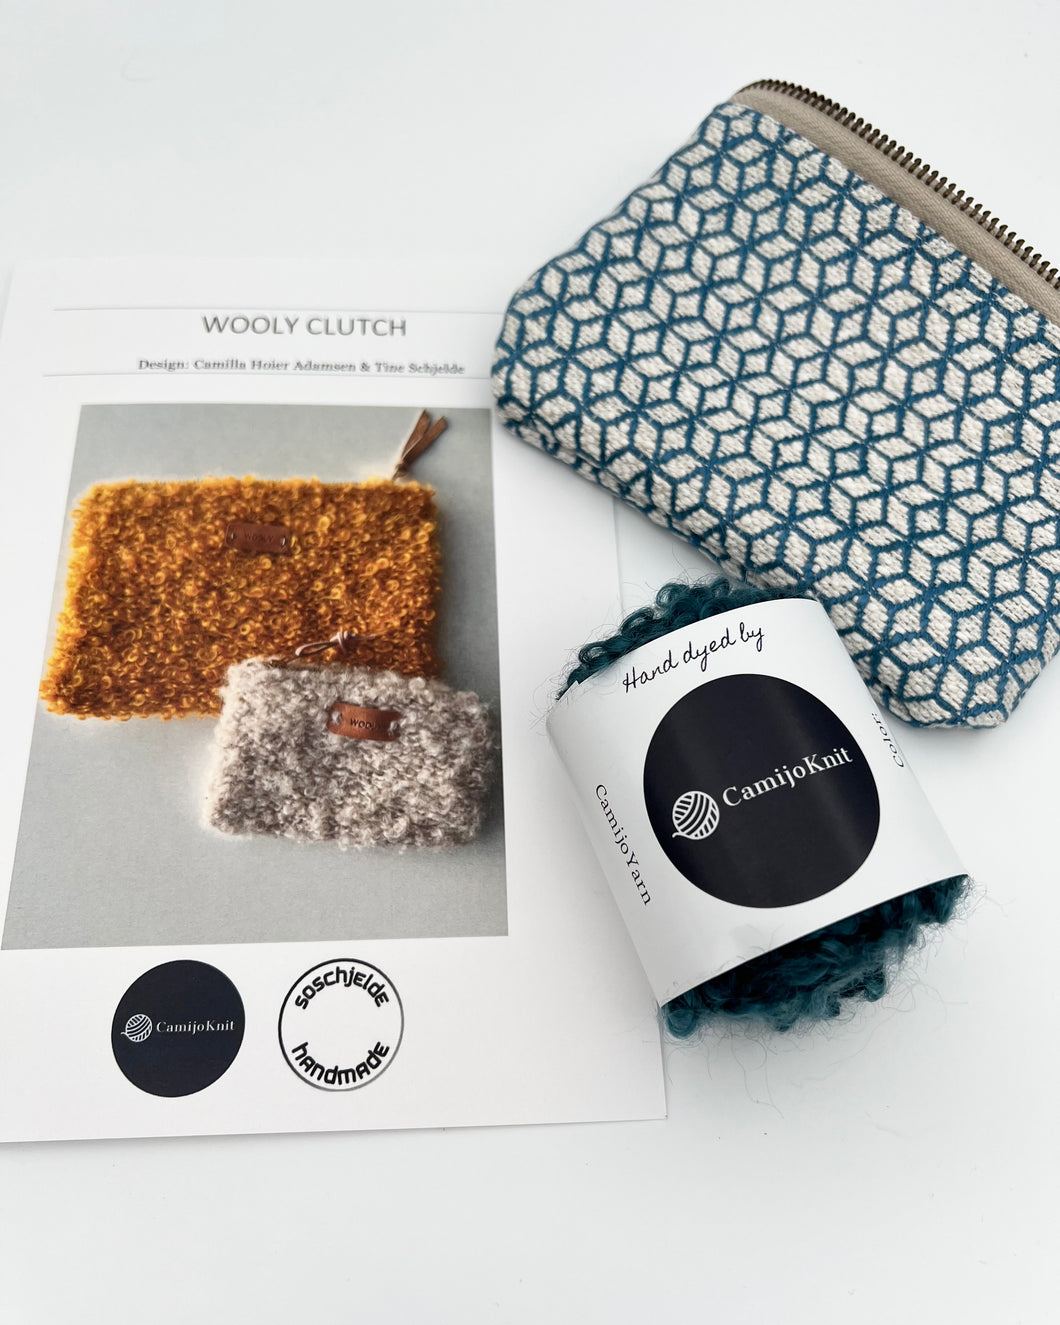 Kit: Wooly Clutch Small